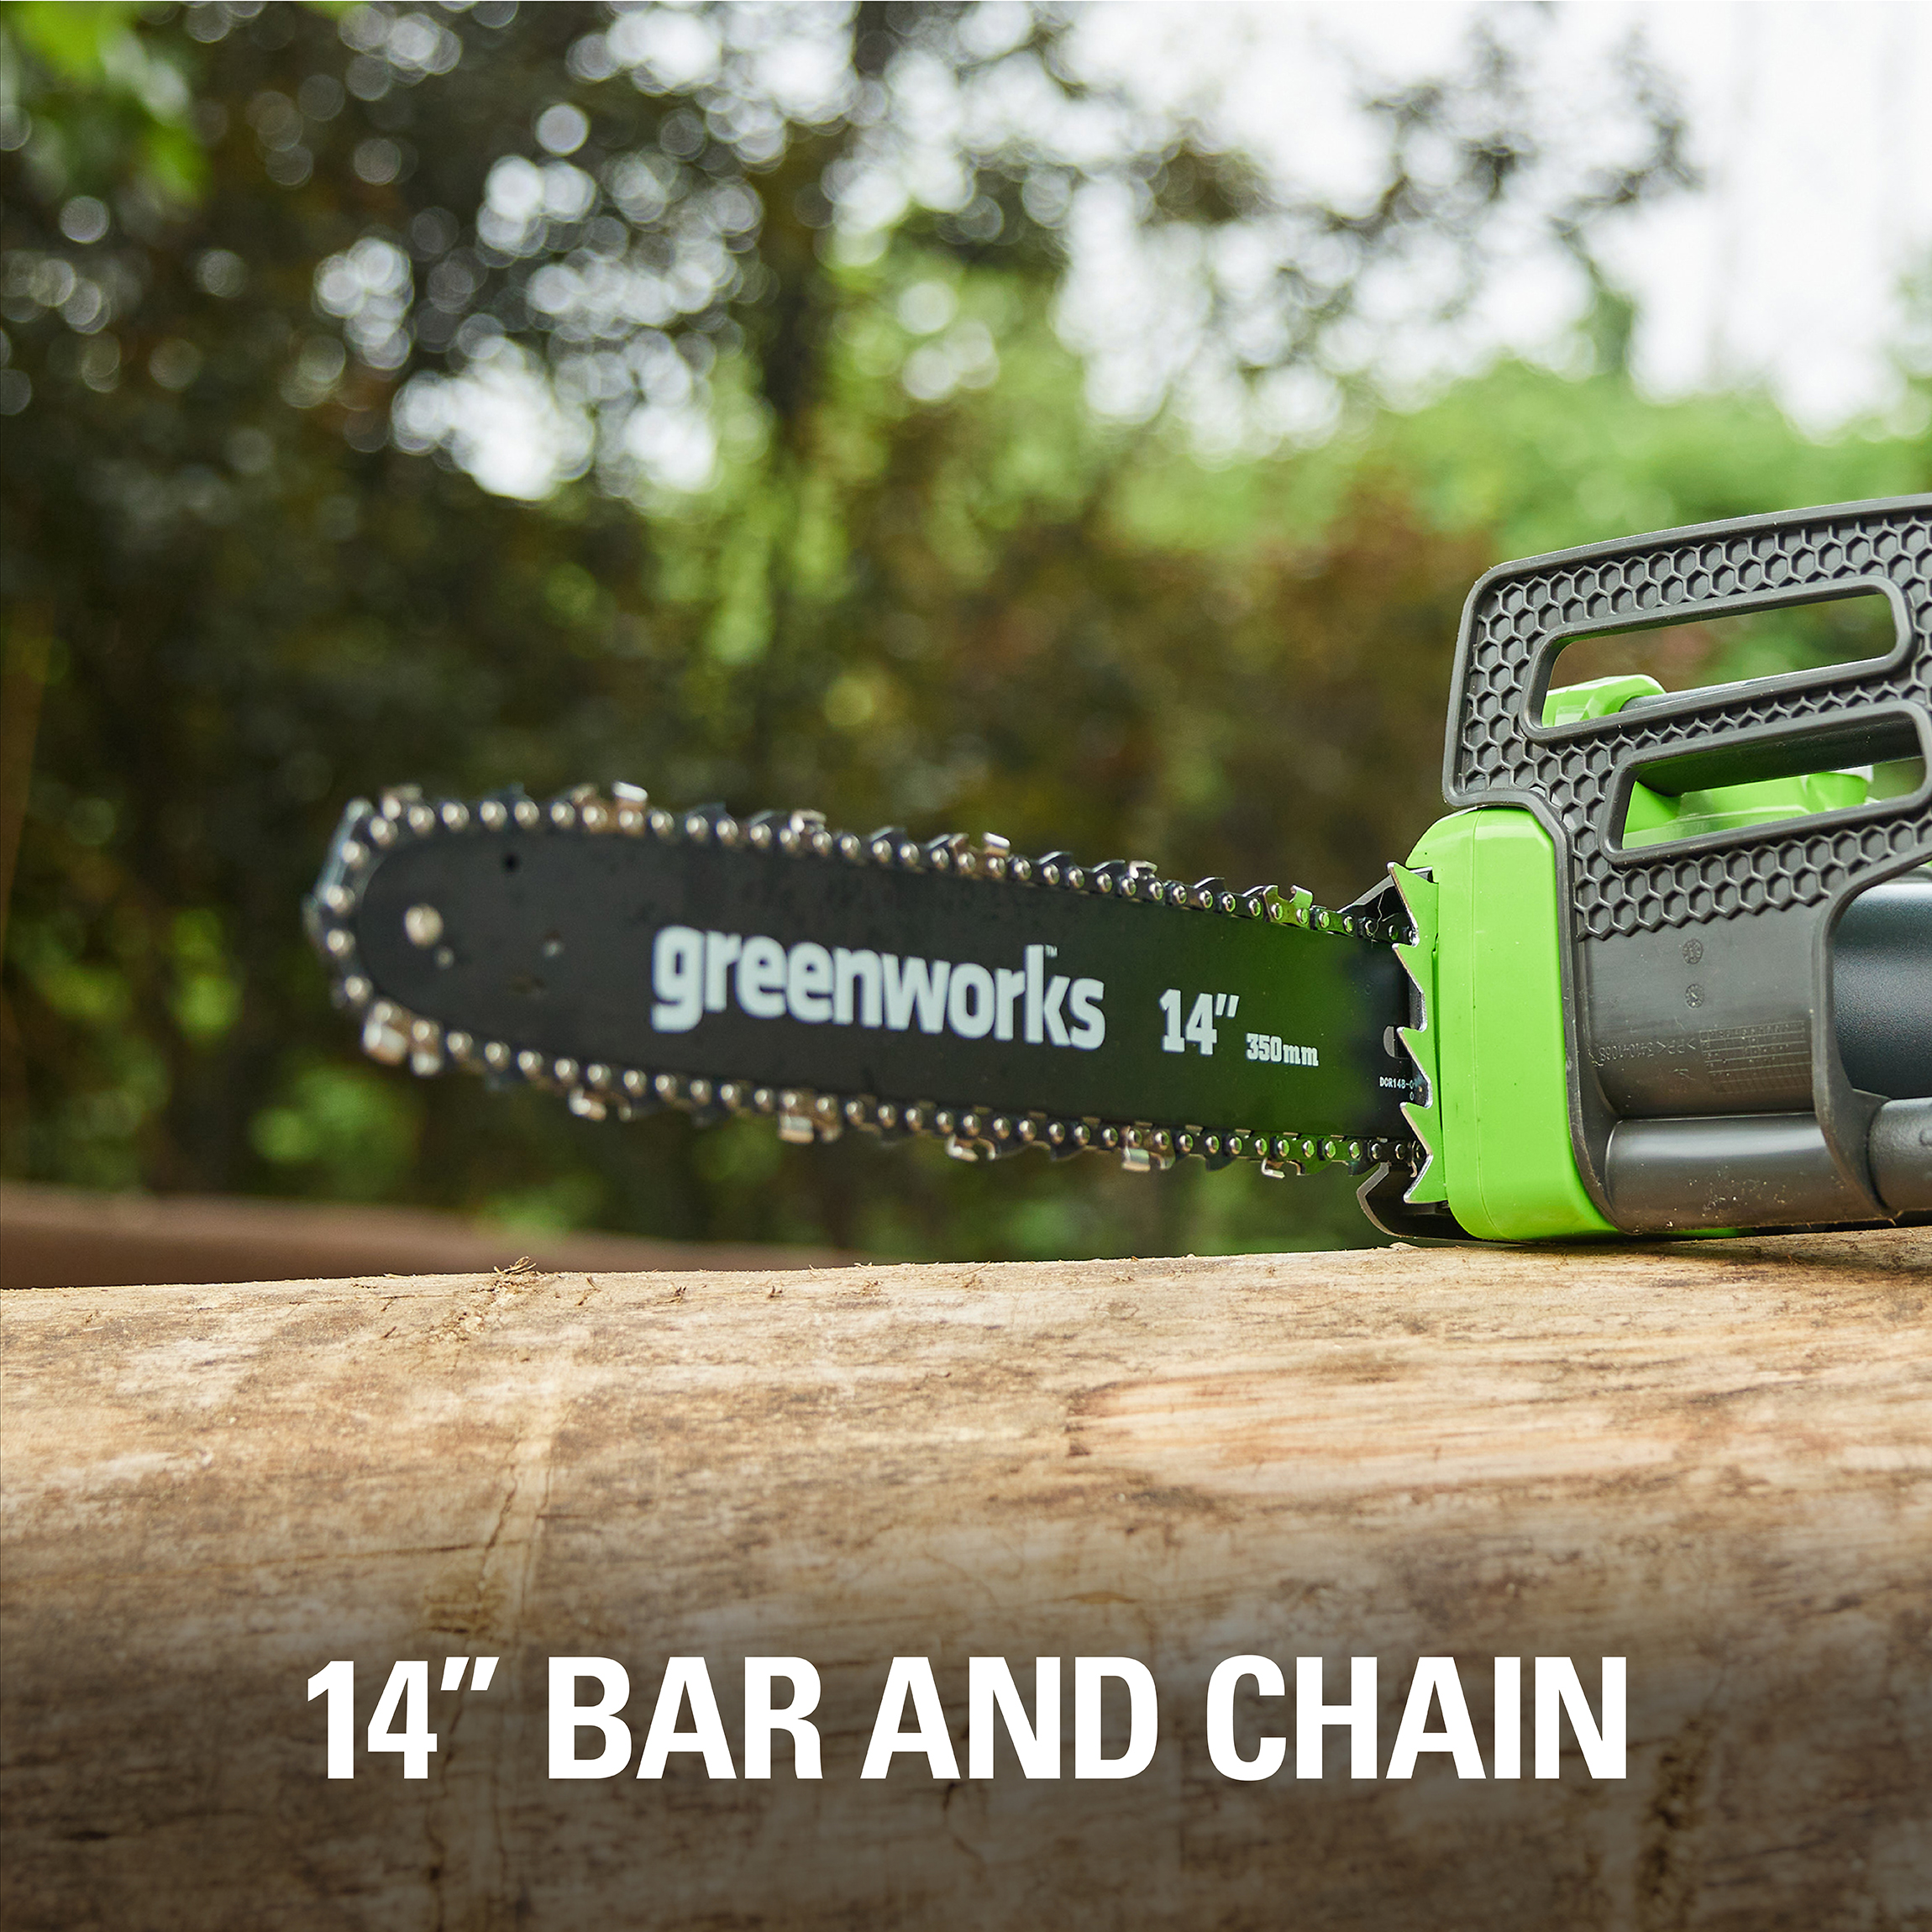 Greenworks 14" Corded Electric 10.5 Amp Chainsaw 20222 - image 5 of 11